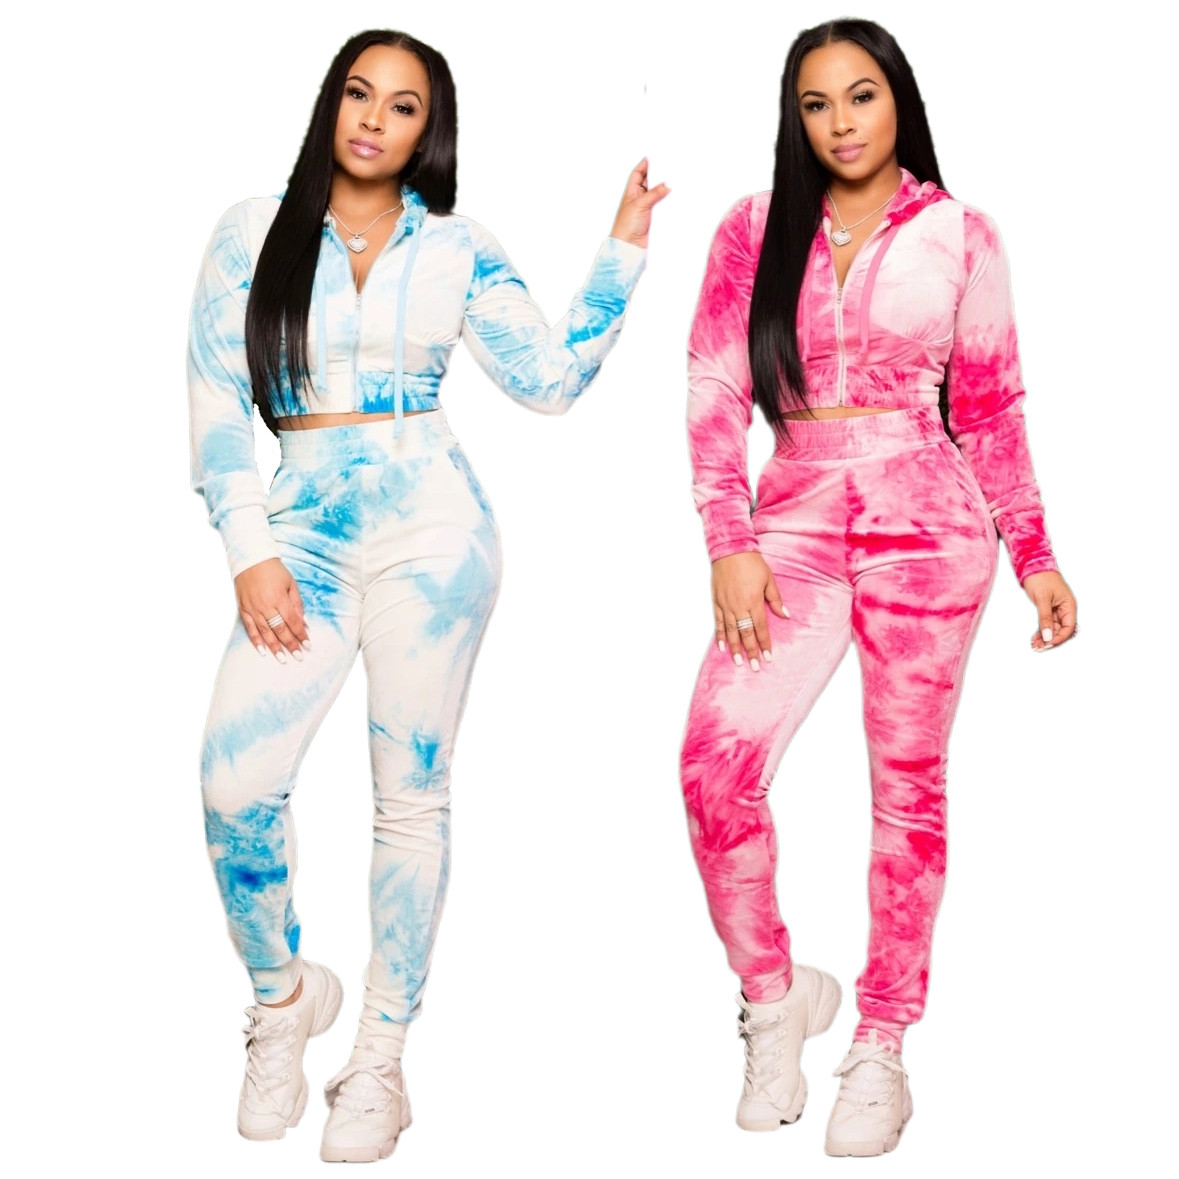 US$ 10.40 - sexy two piece tracksuit 9650 - www.dream-flying01.com